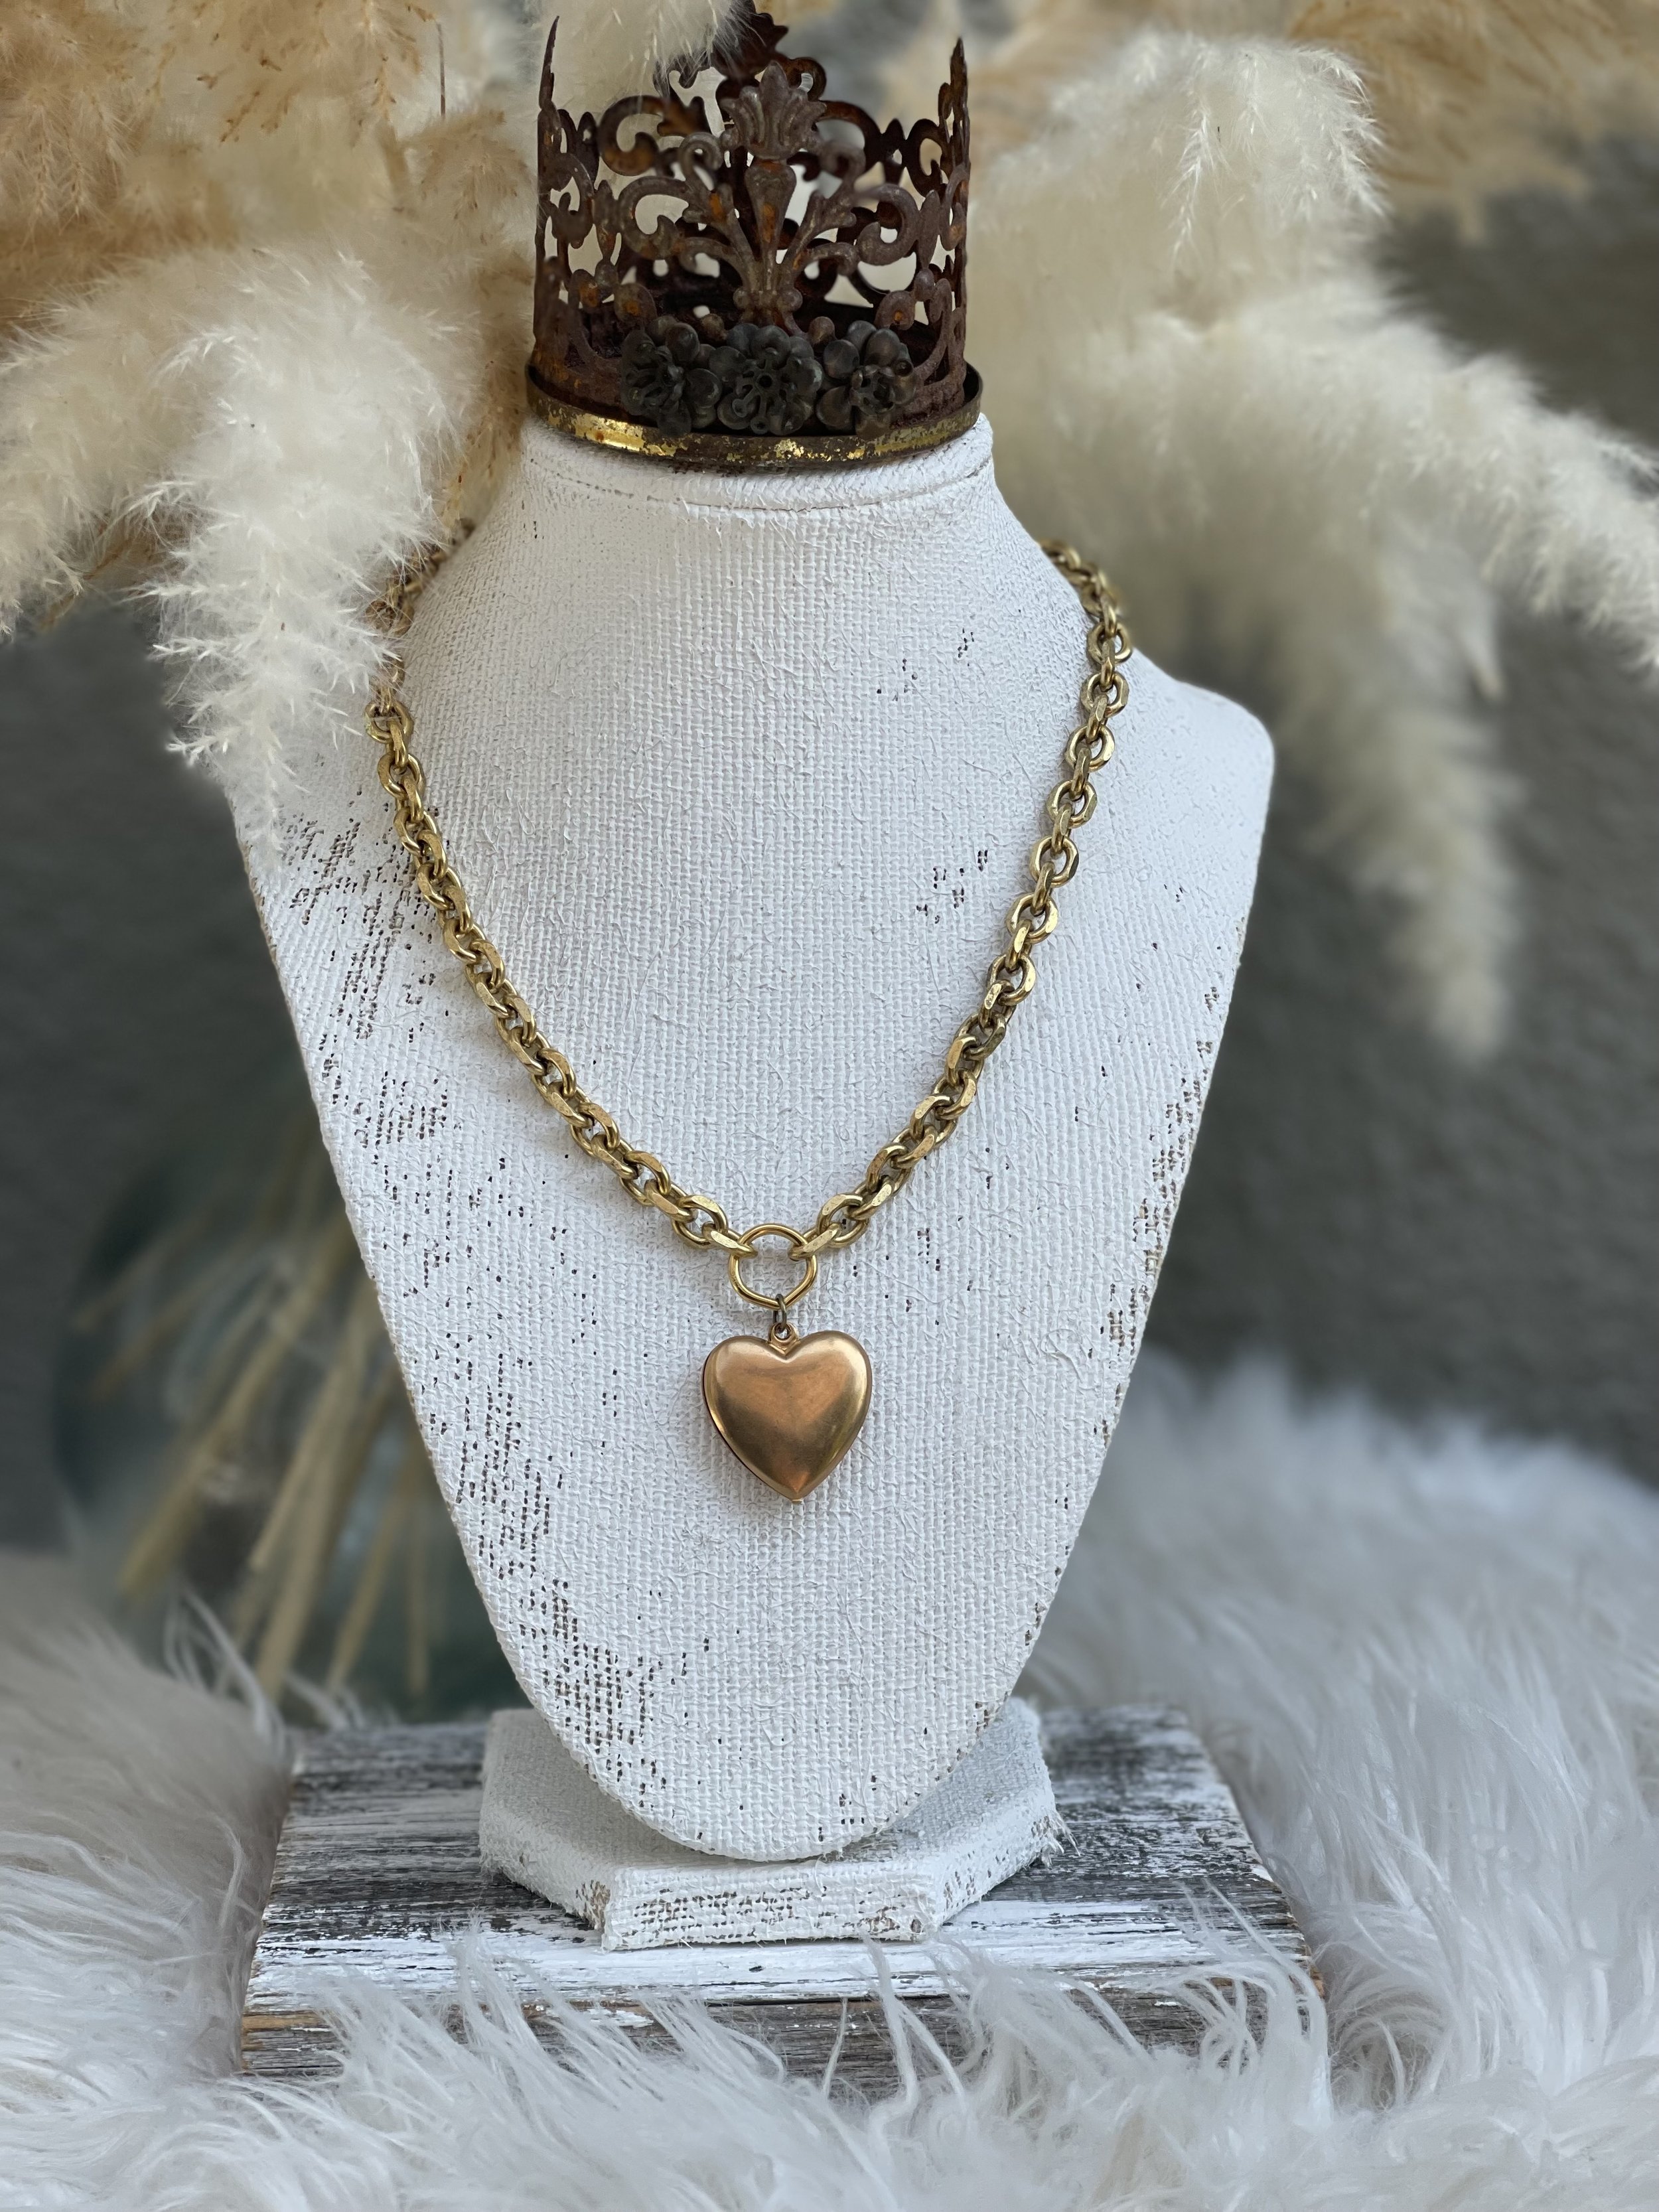 Silver Chain w/Puffy Heart Pendant Necklace - Evelie Blu Boutique